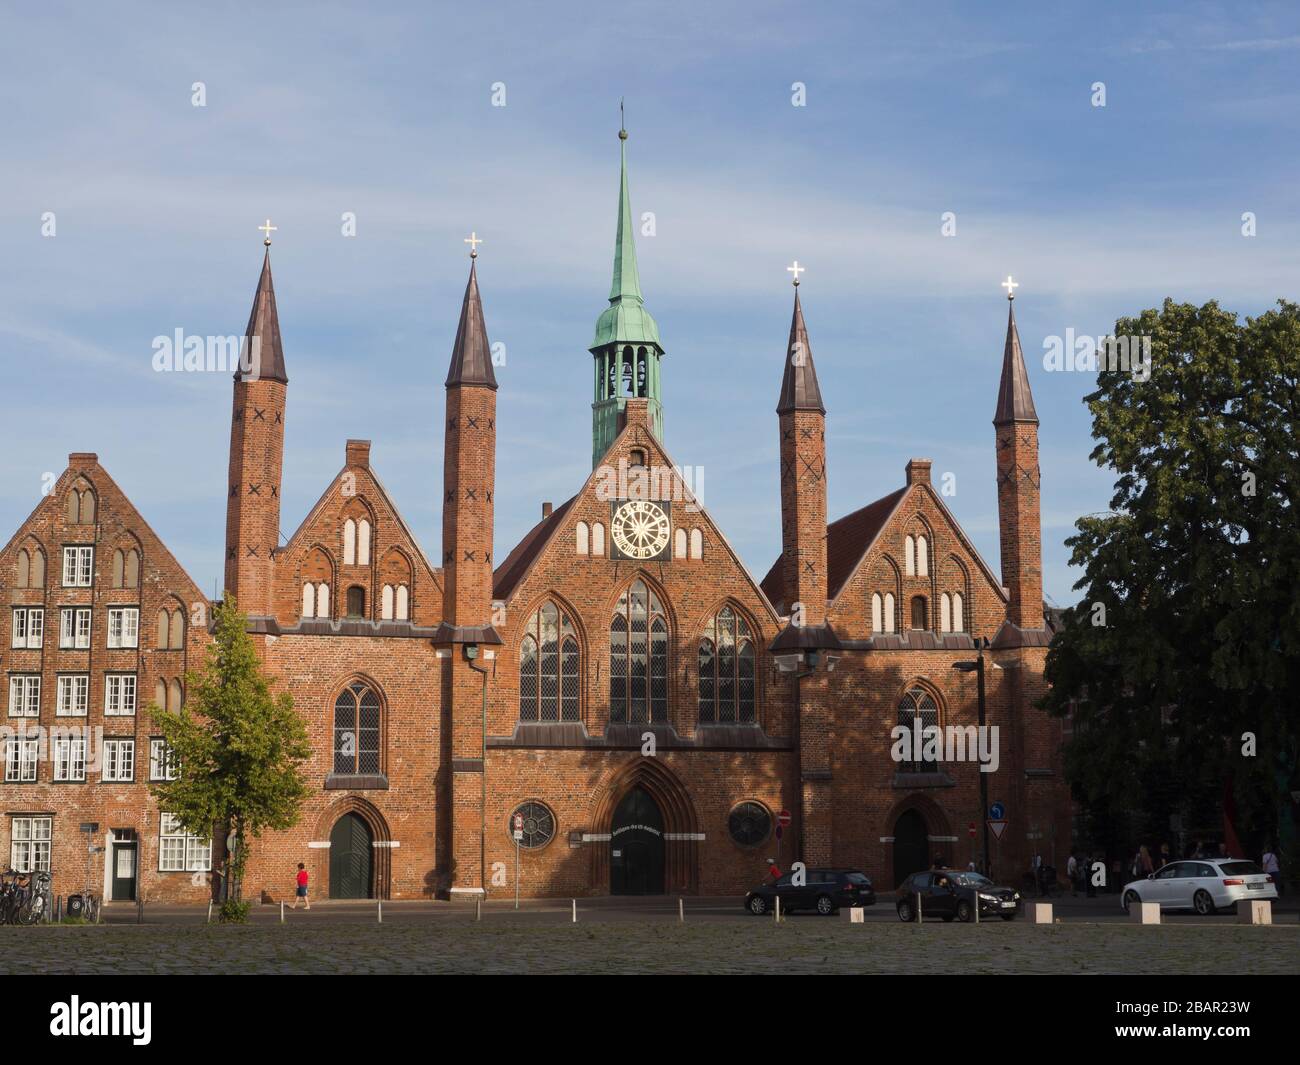 Heiligen-Geist-Hospital in Lübeck Germany, a social hep institution dating back to 1286 Stock Photo